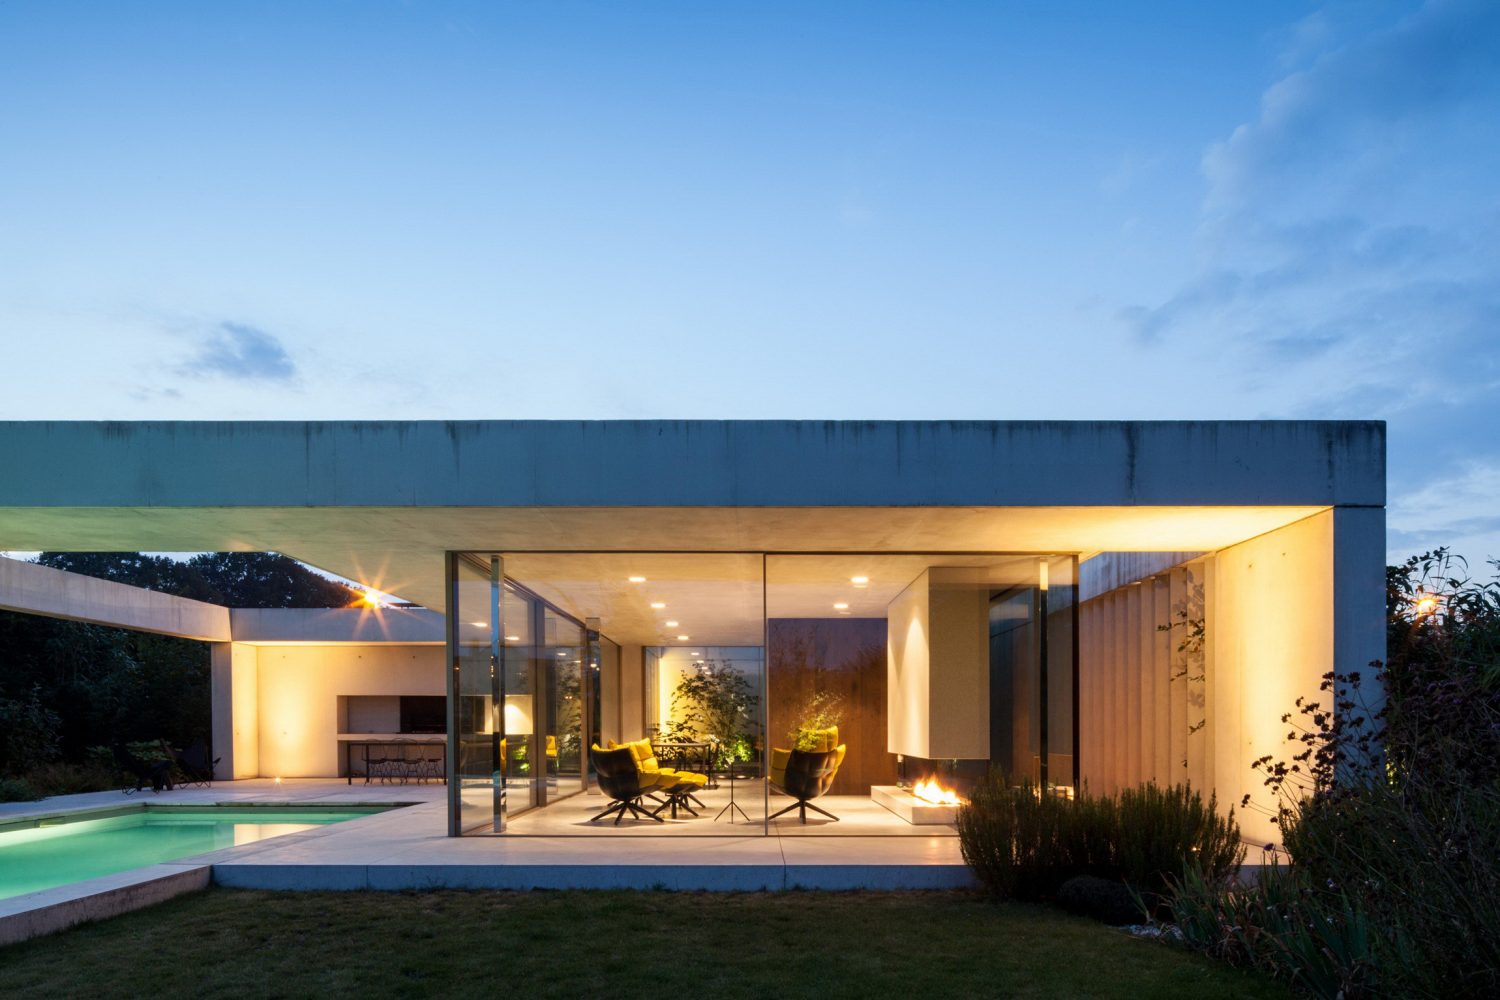 Poolhouse O by Steven Vandenborre Architects